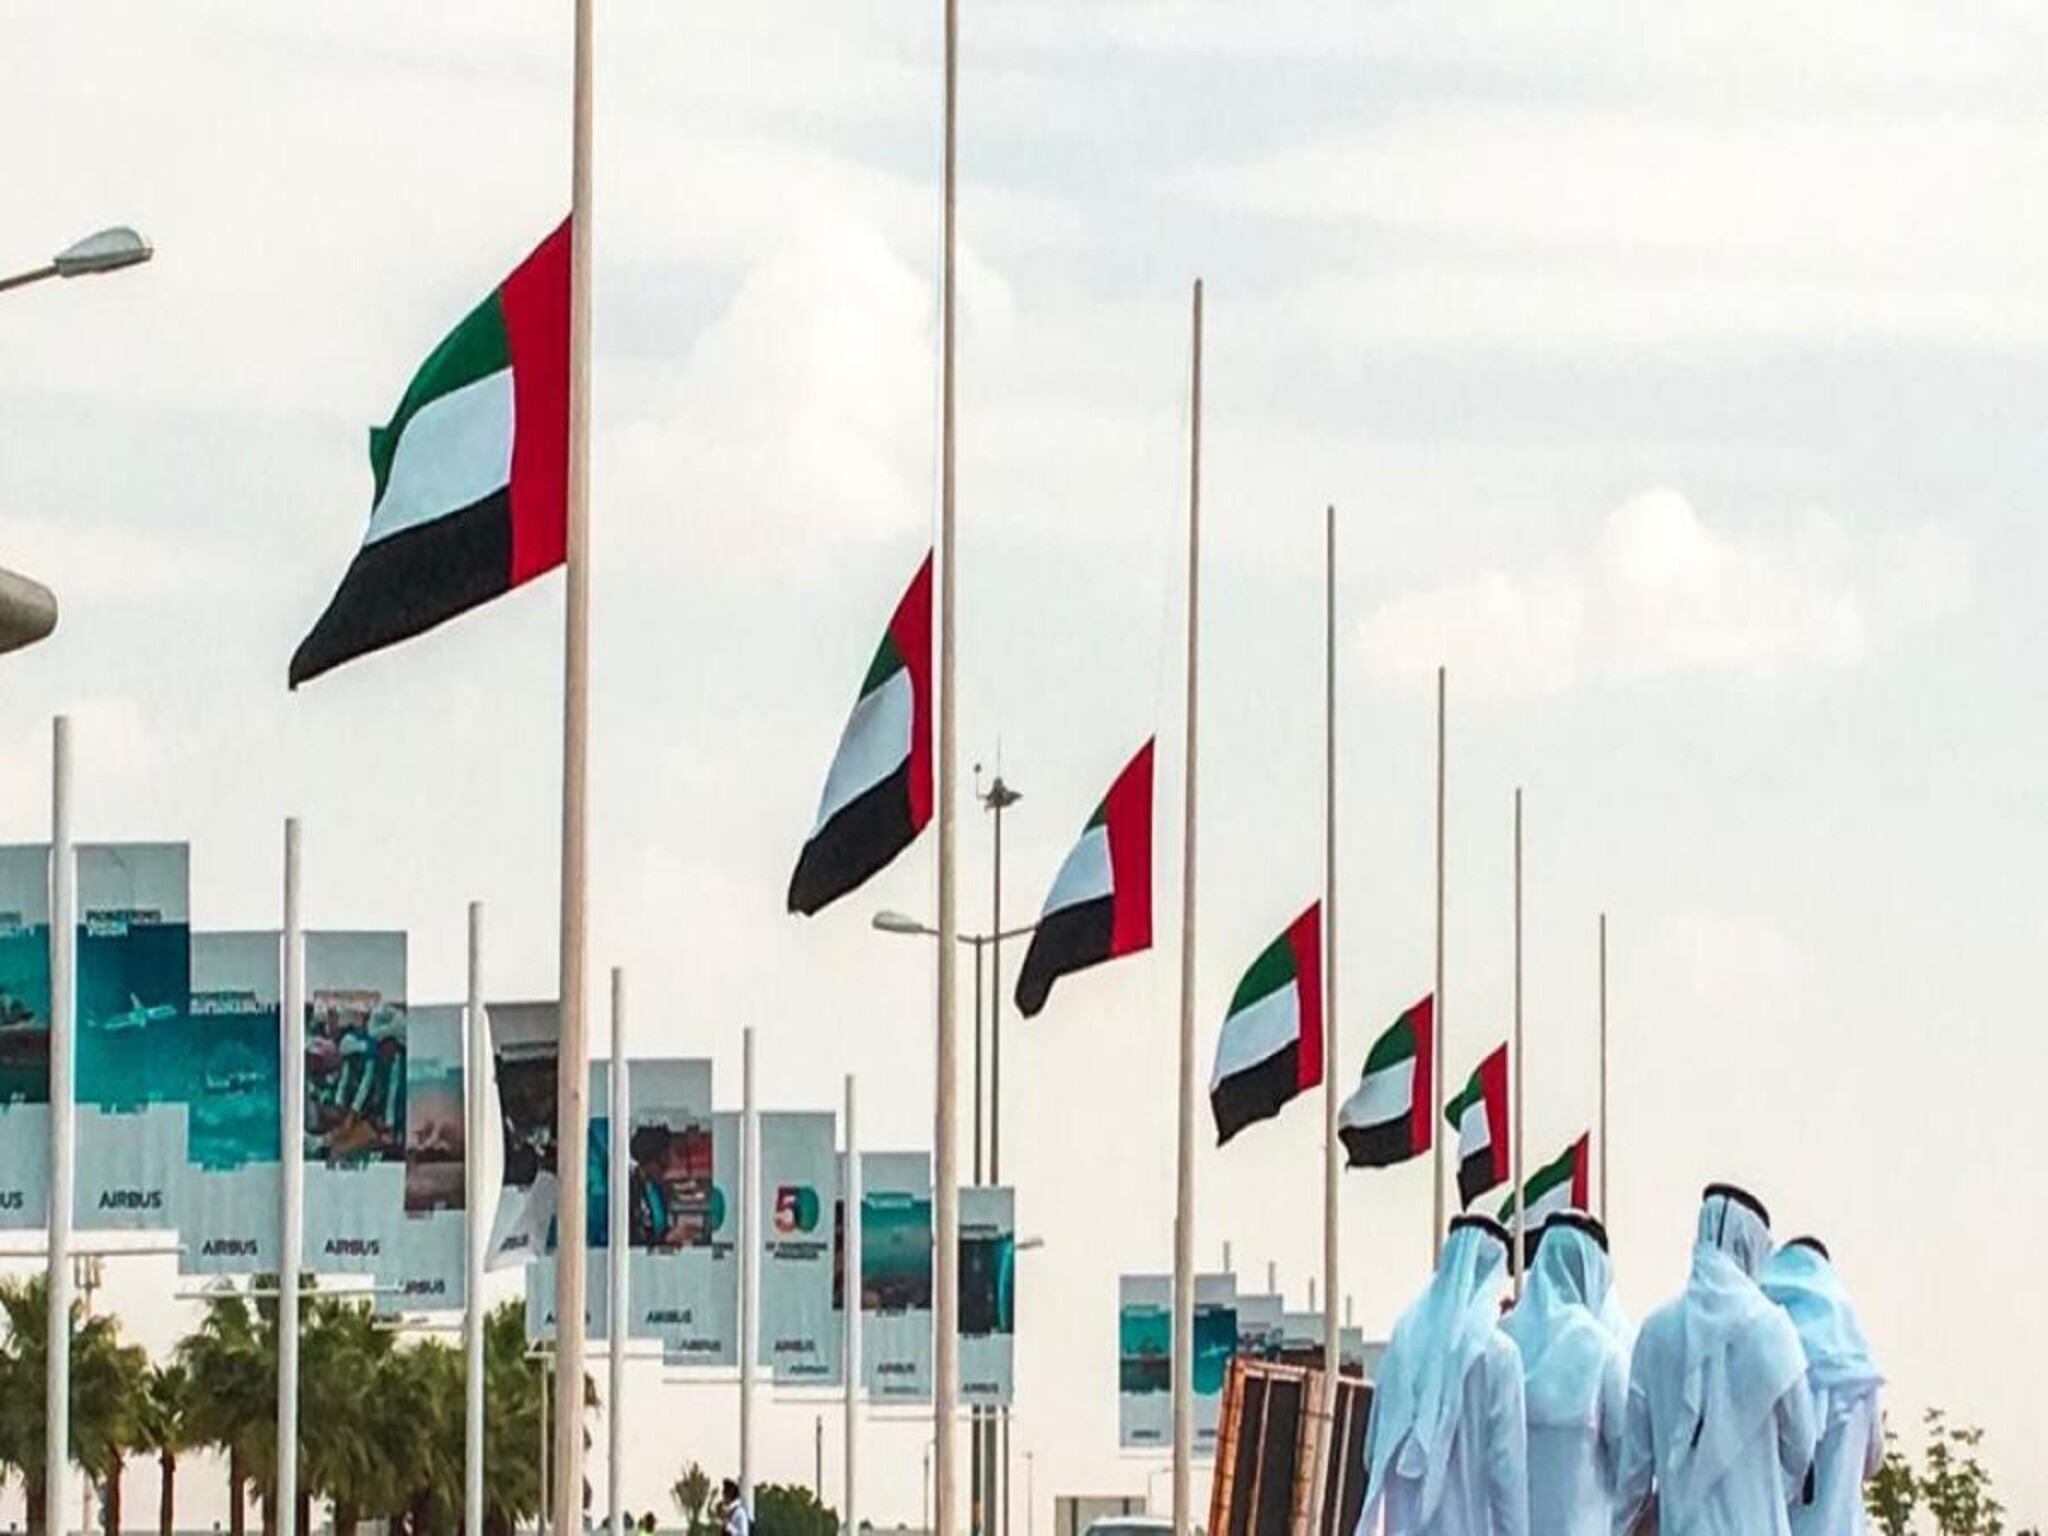 The UAE announces the death of a member of the royal family